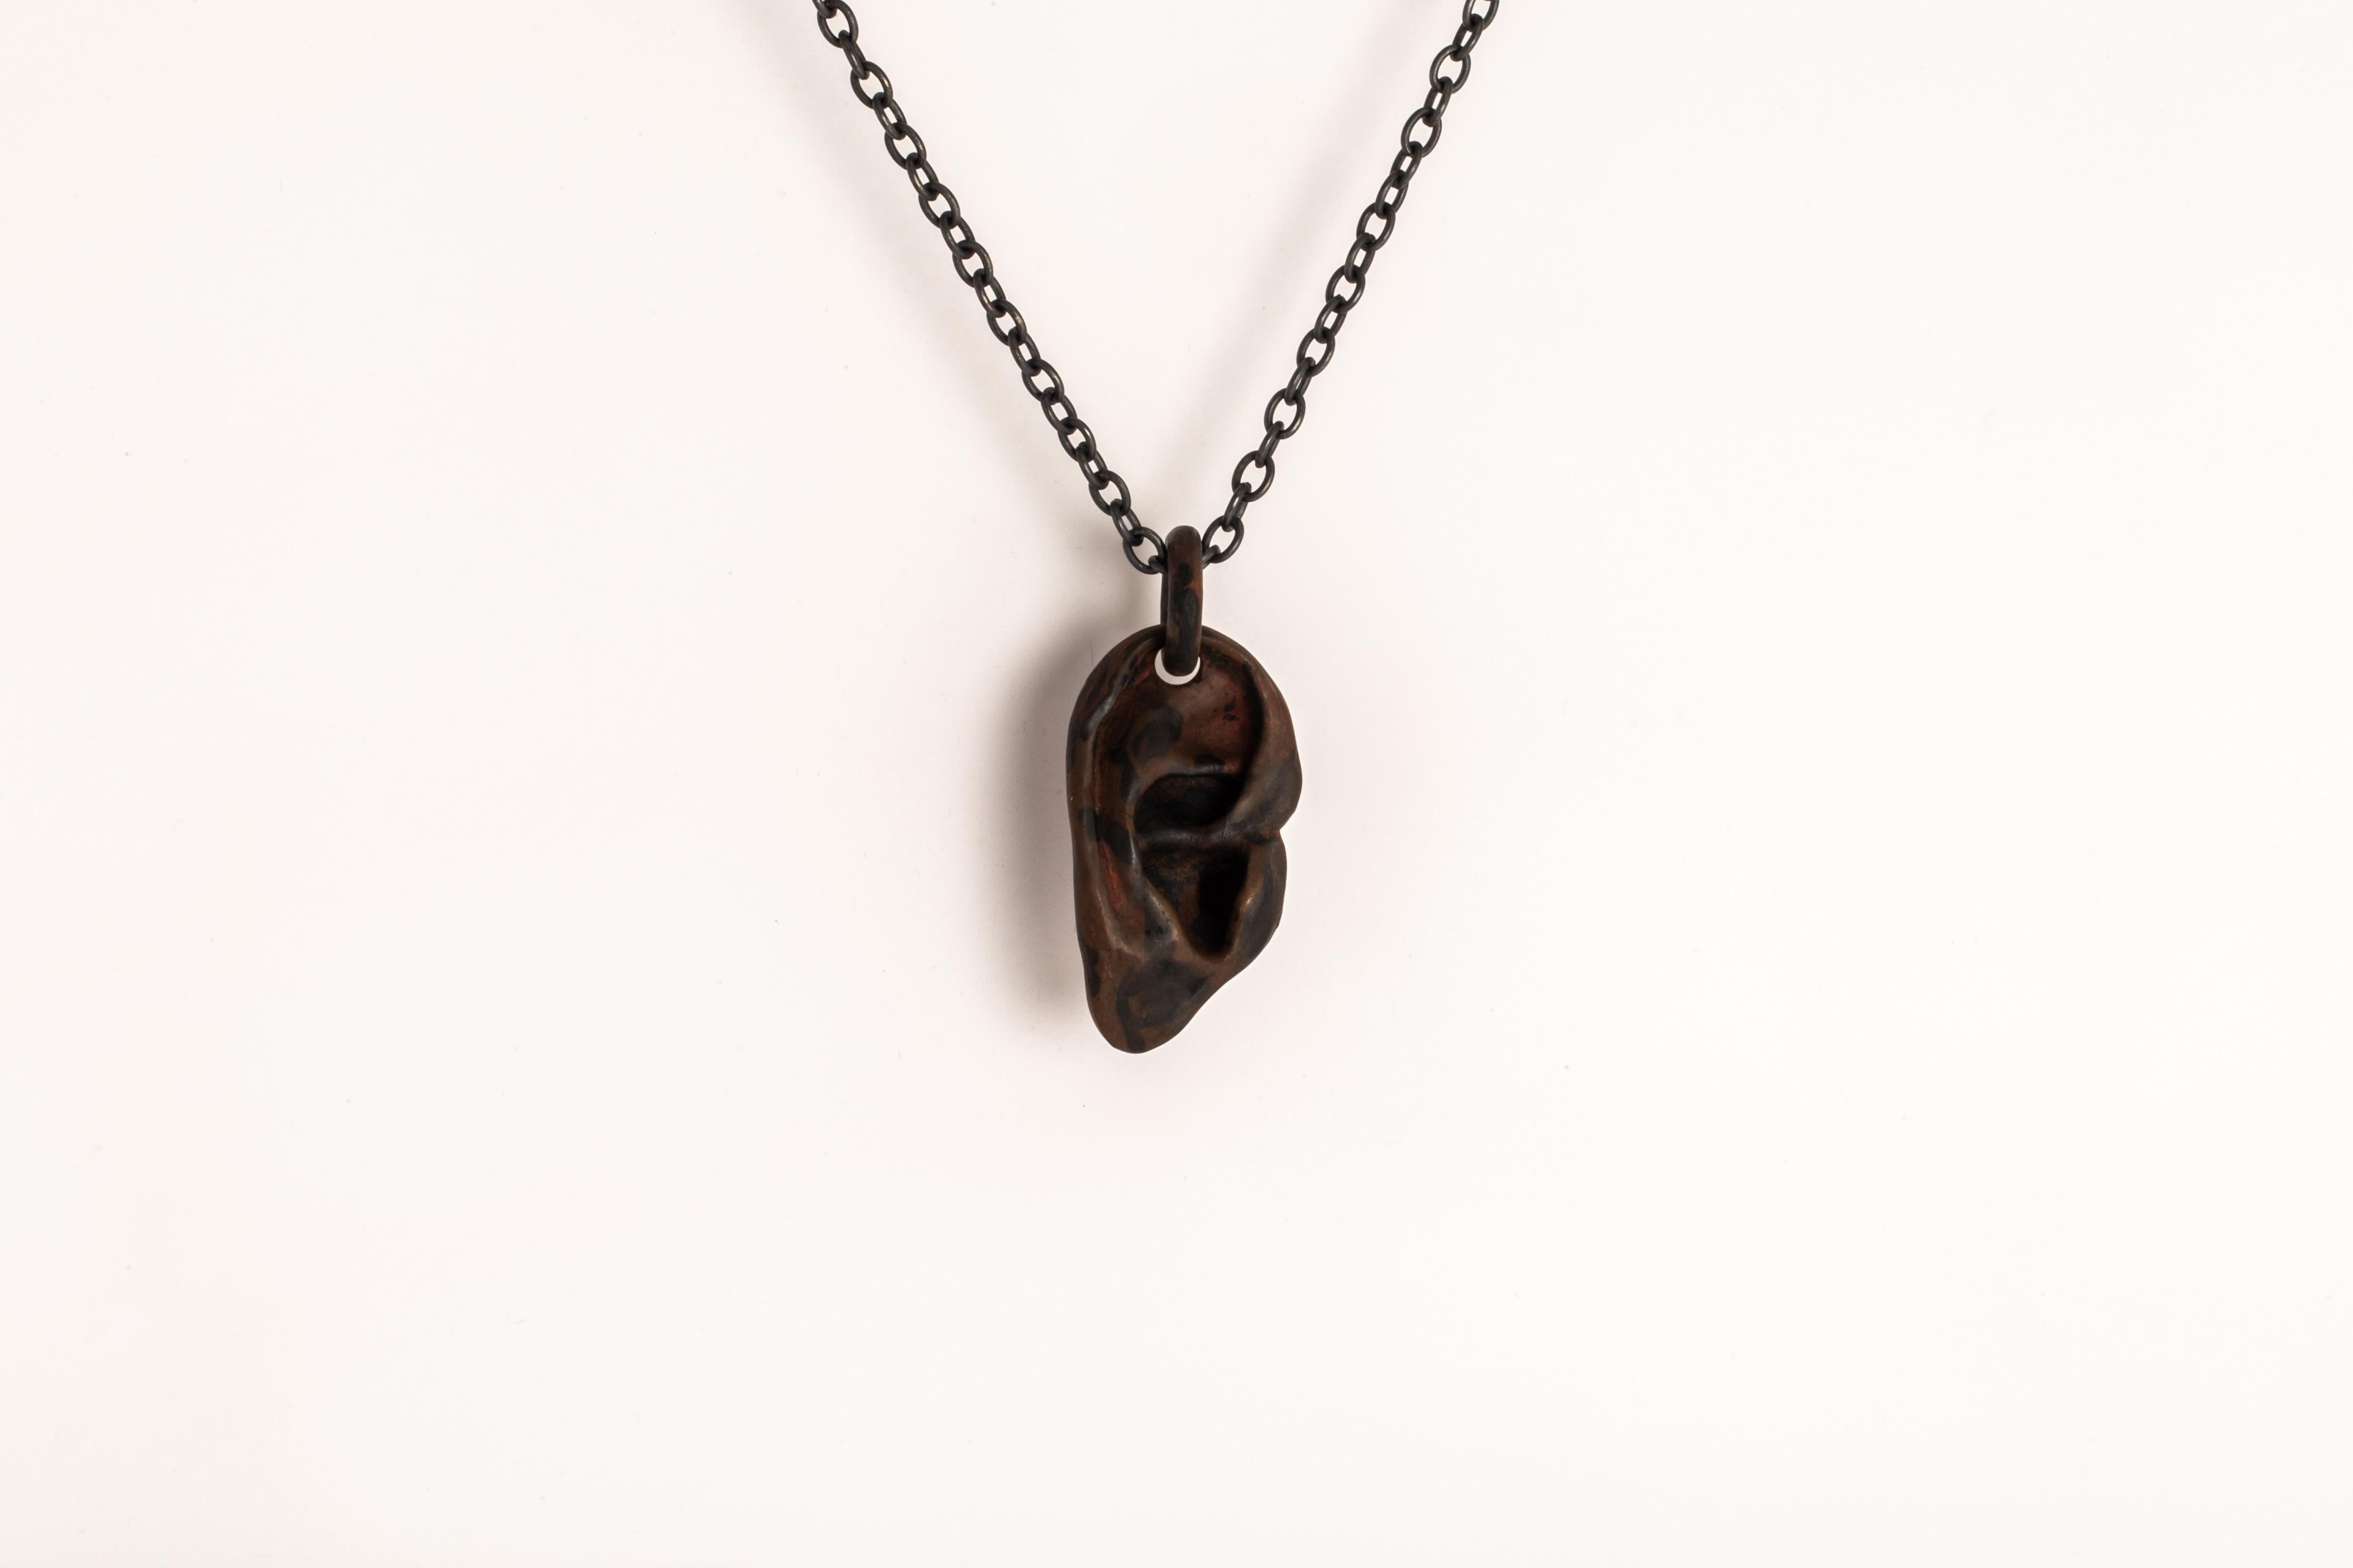 Pendant necklace in the shape of body part in burned brass, it comes on a 74cm sterling silver chain. This finish may fade over time, which can be considered an enhancement. Please note that Black Sterling tends to appear darker in photograph than